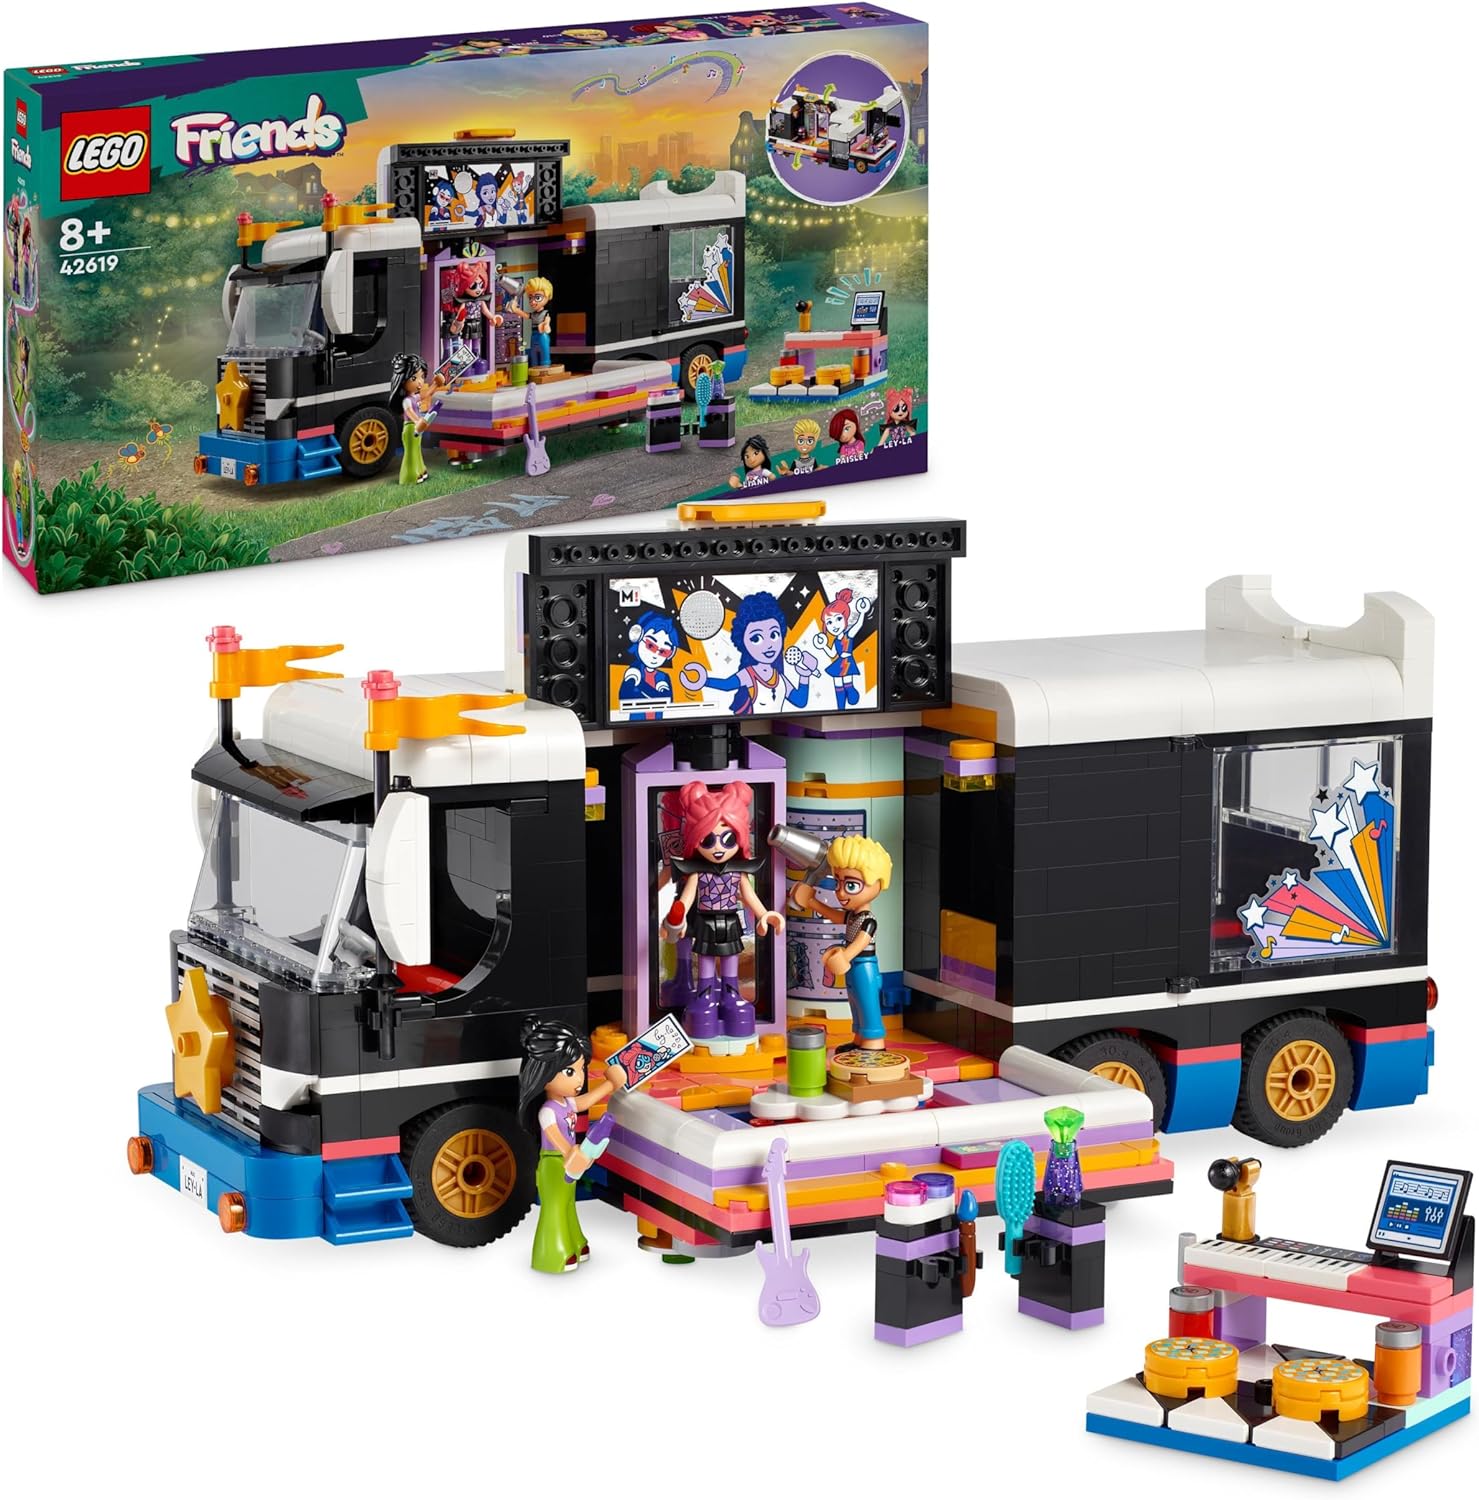 LEGO Friends Pop Star Tourbus, Music Set with Truck Toy and 4 Figures, Promotes Social-Emotional Development, Birthday Gift for Girls and Boys from 8 Years 42619